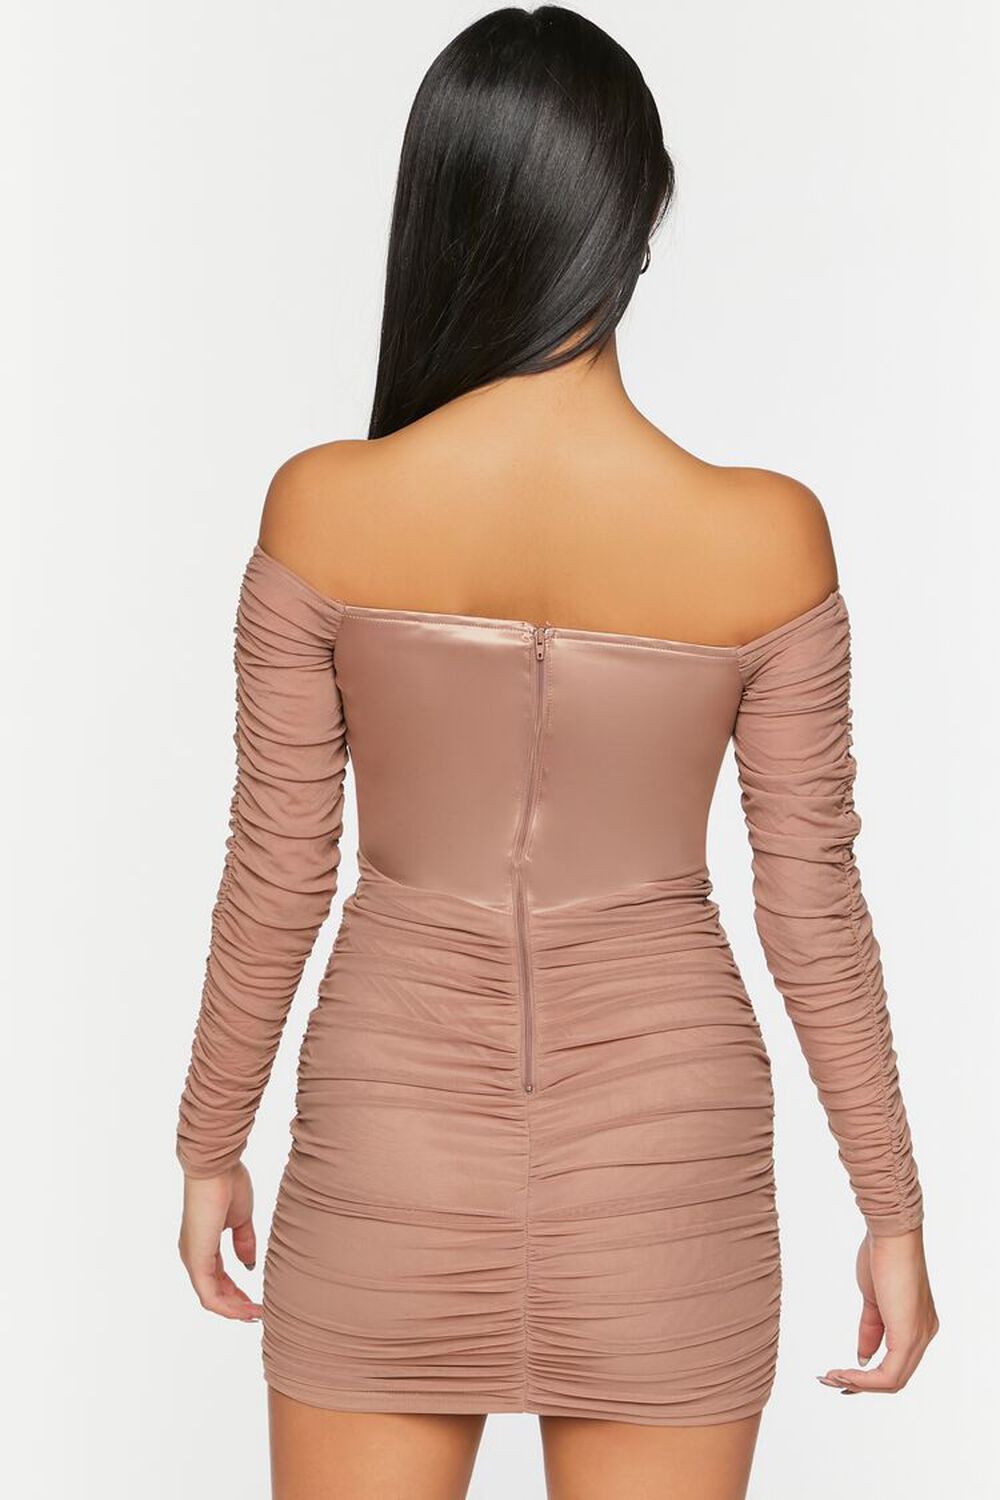 CAPPUCCINO Ruched Mesh Off-the-Shoulder Mini Dress, image 3